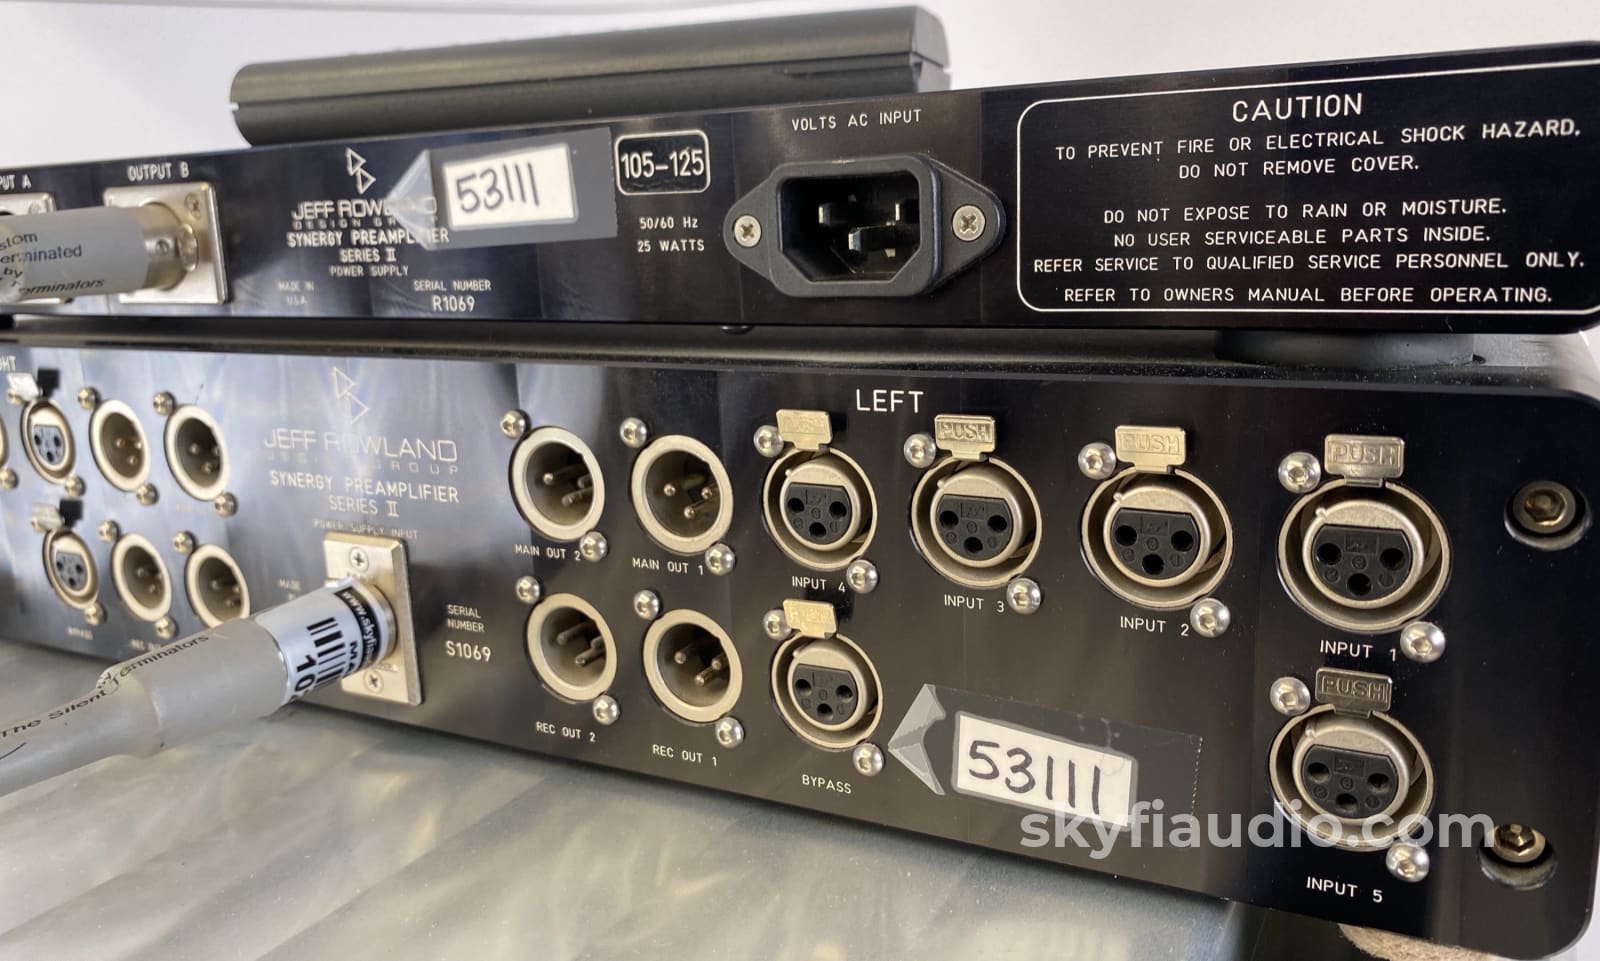 Jeff Rowland Synergy Mkii Two Piece Preamplifier With Remote